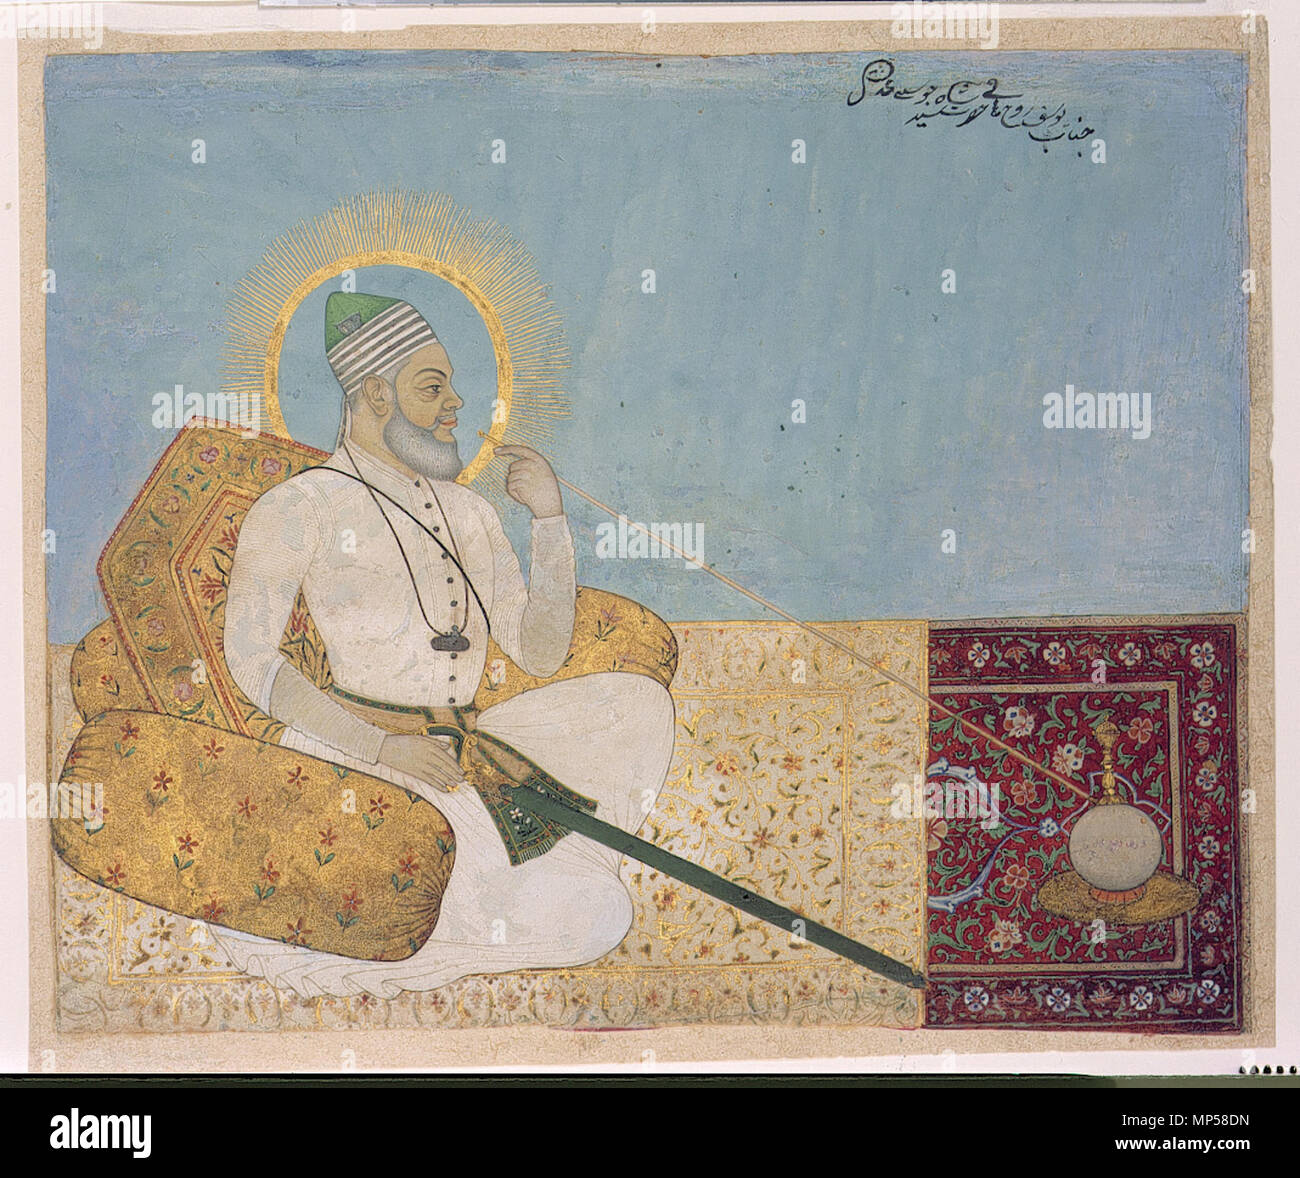 . English: Display Artist: Rahim Khan Creation Date: ca. 1670 Display Dimensions: 7 27/32 in. x 9 3/4 in. (19.9 cm x 24.8 cm) Credit Line: Edwin Binney 3rd Collection Accession Number: 1990.483 Collection: <a href='http://www.sdmart.org/art/our-collection/asian-art' rel='nofollow'>The San Diego Museum of Art</a> . 6 September 2011, 14:05:52. English: thesandiegomuseumofartcollection 1085 Saint Shah Raju seated against a bolster (6125049392) Stock Photo